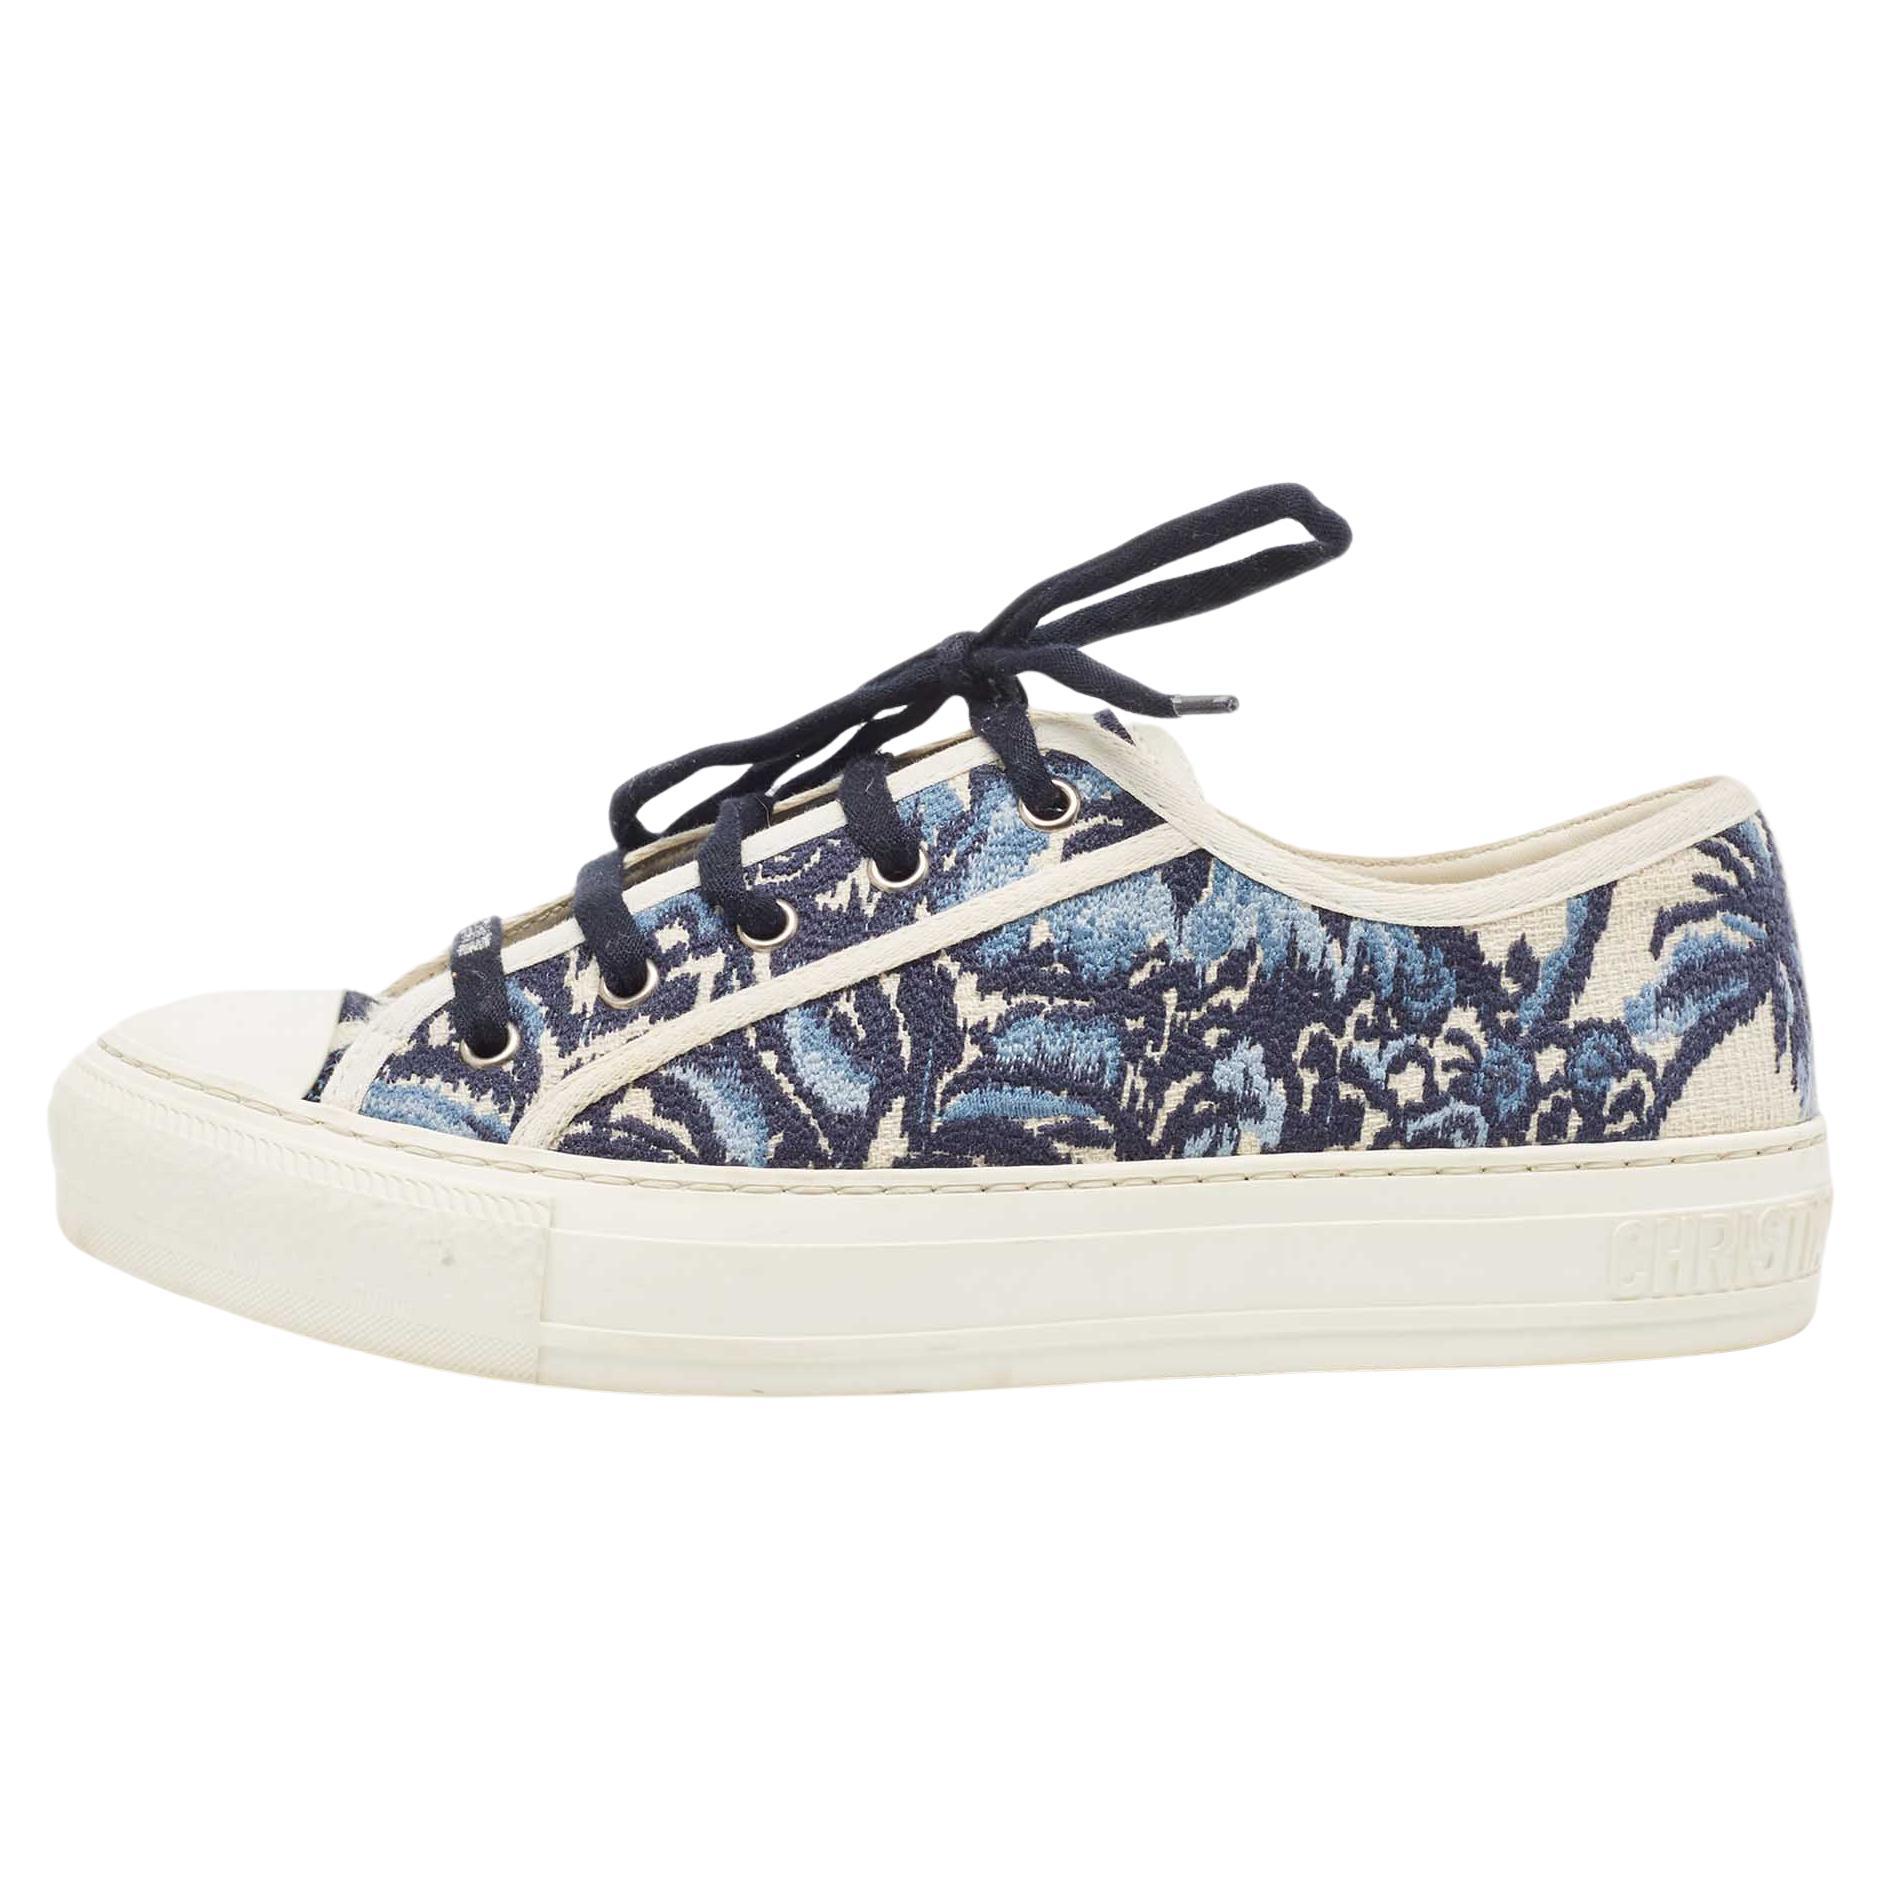 Dior Navy Blue/White Floral Embroidered Canvas Walk'n'Dior Sneakers Size 39 For Sale